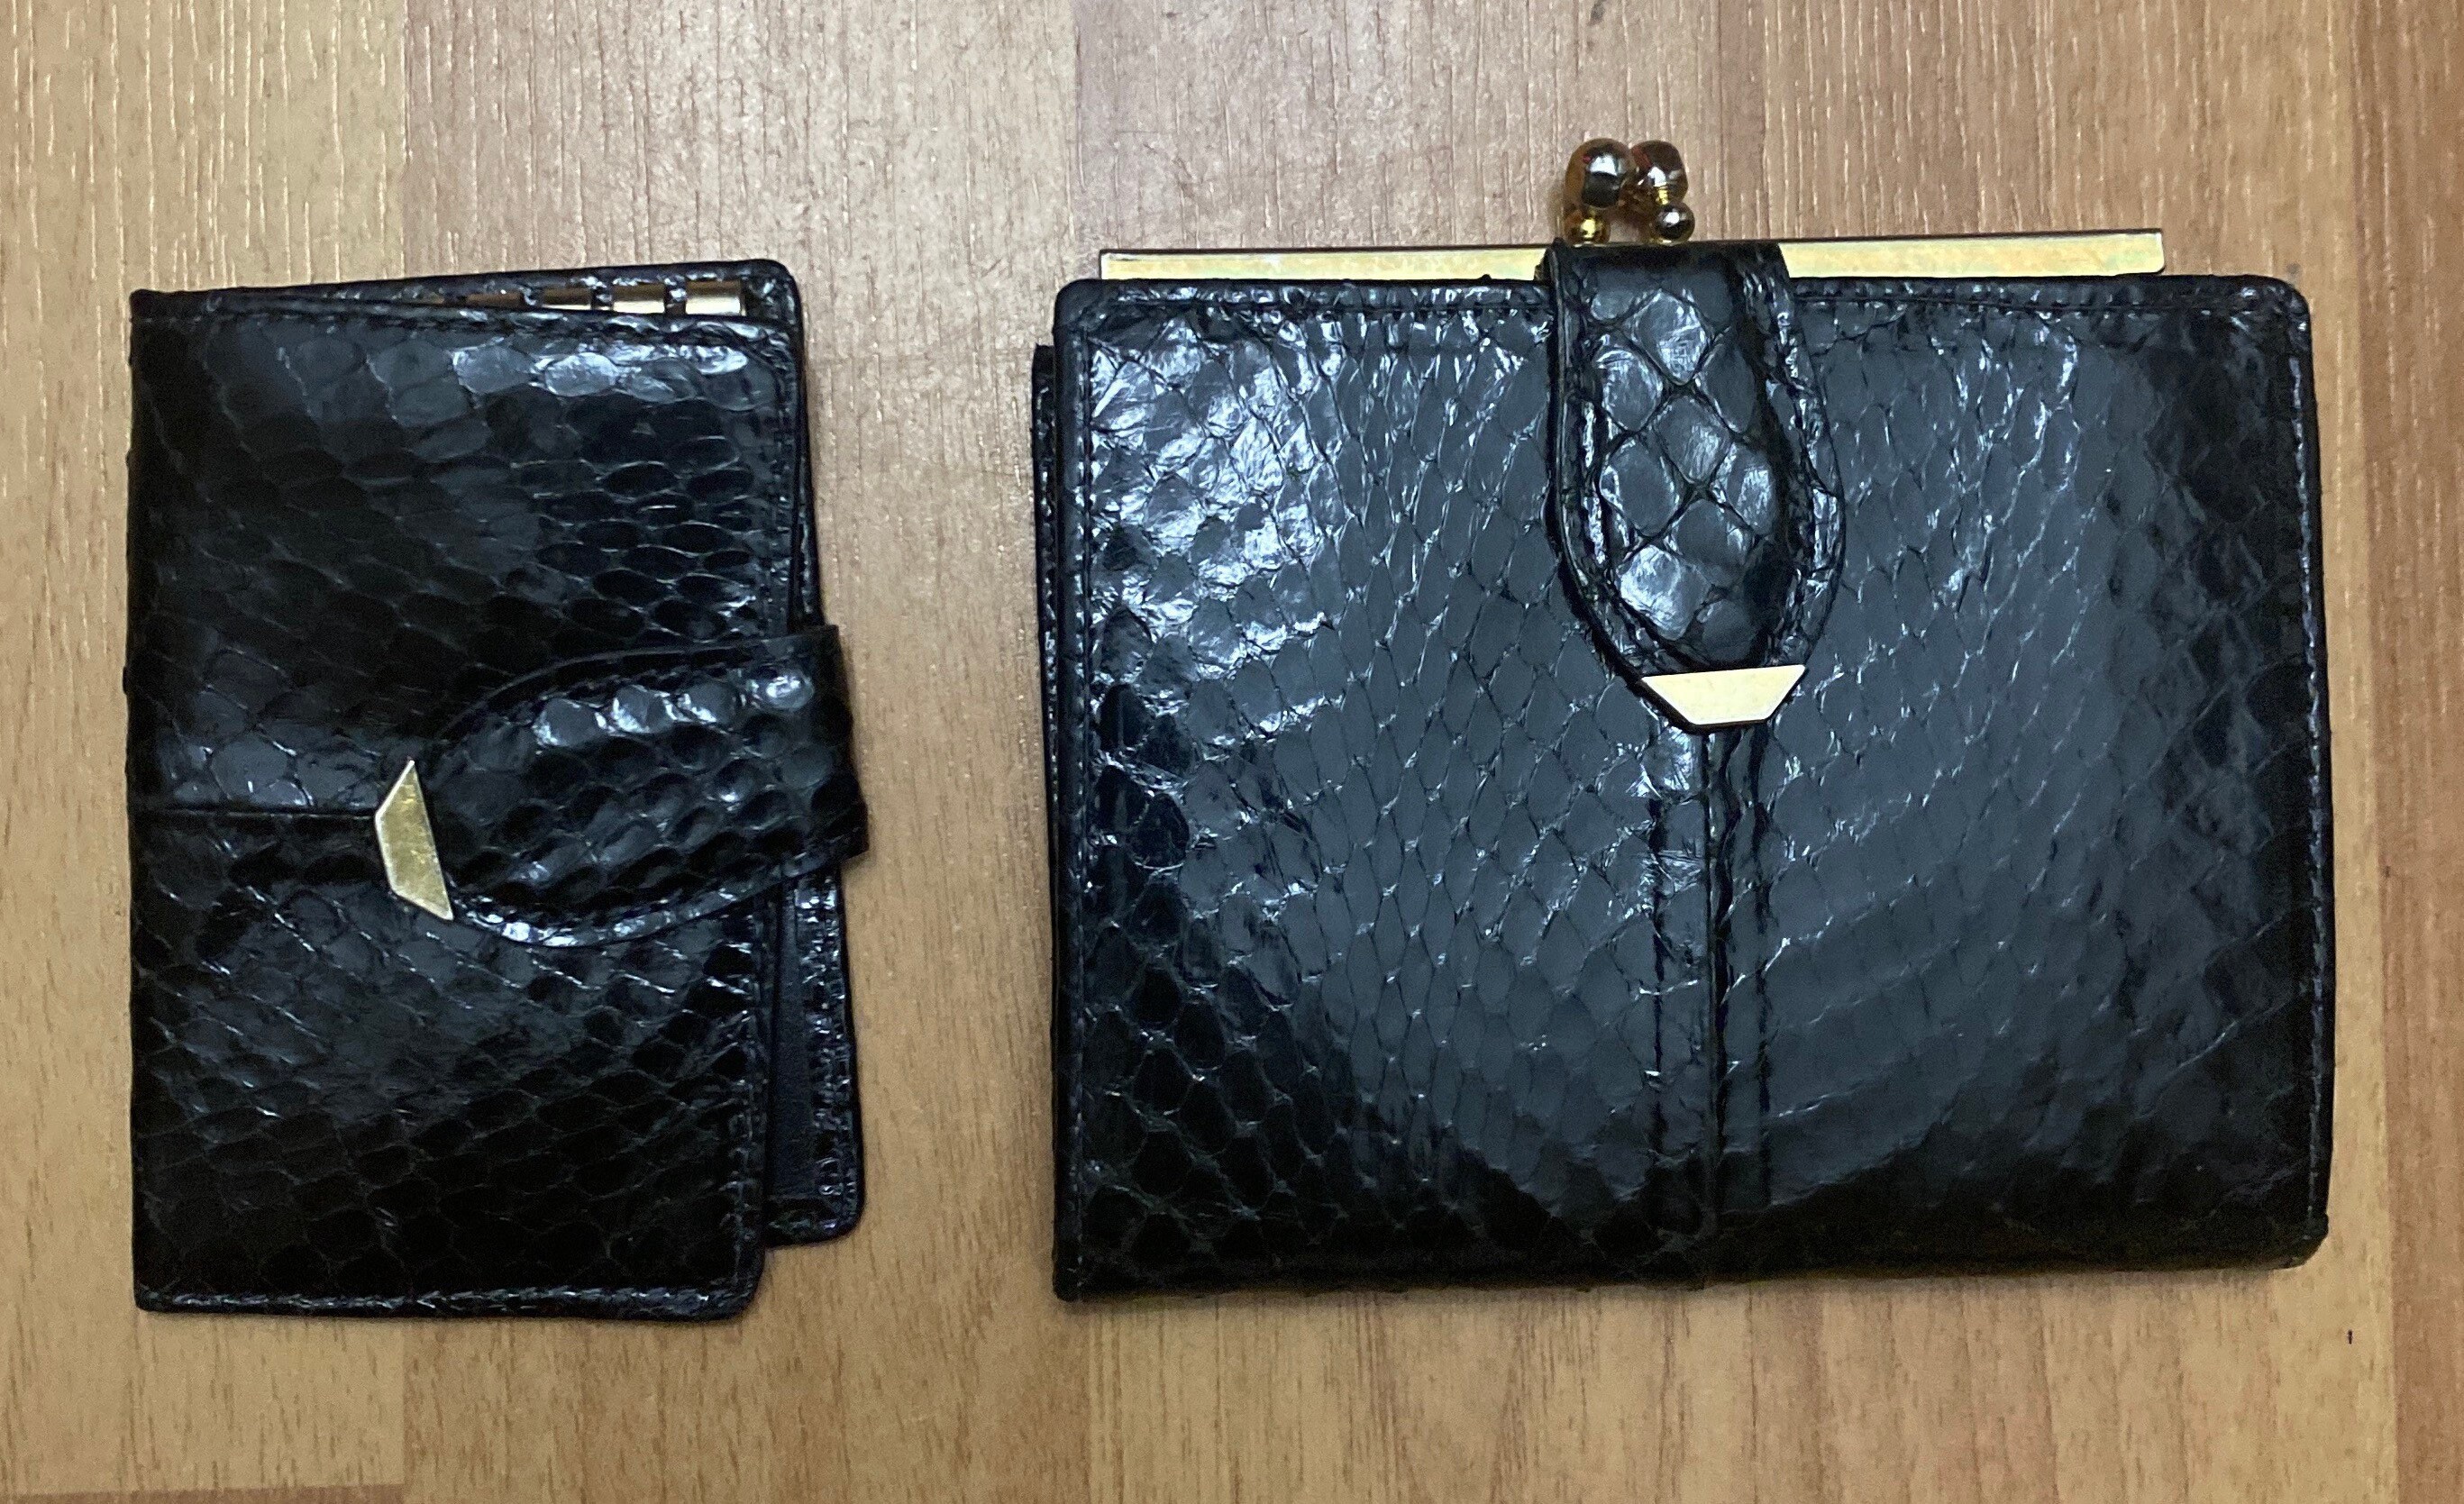 Pocket Organizer Crocodilien Mat - Wallets and Small Leather Goods